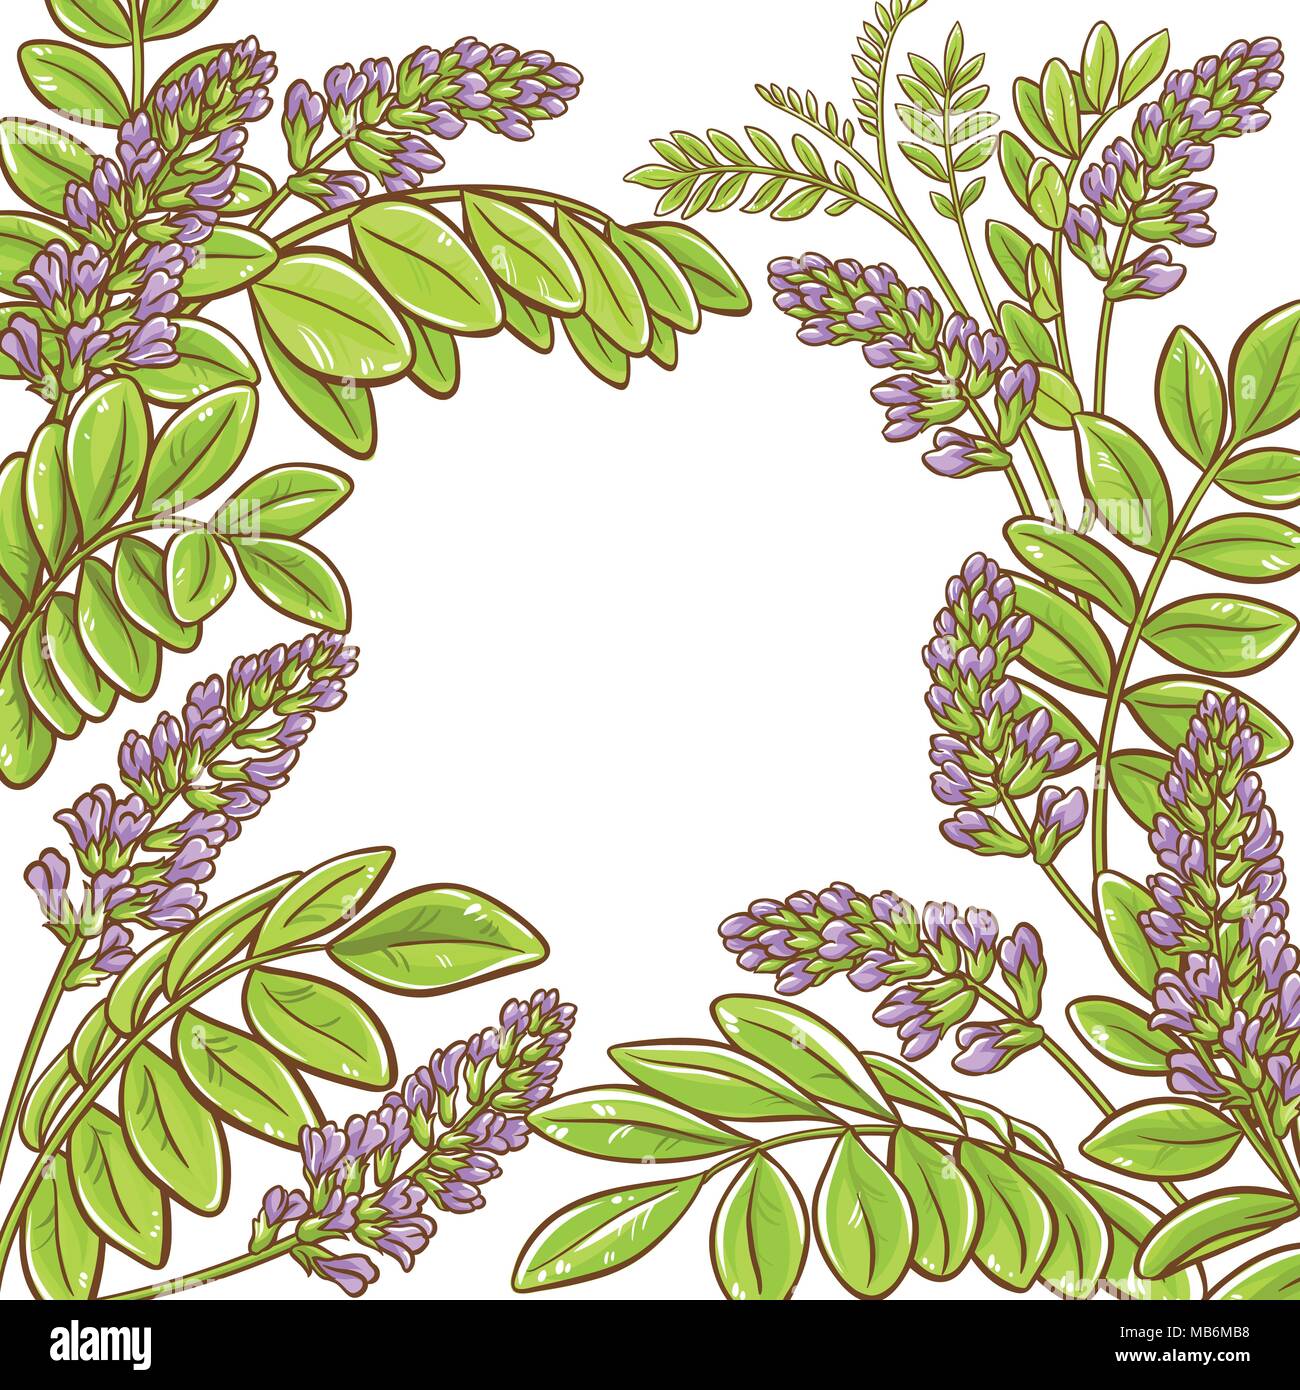 licorice plant vector frame on white background Stock Vector